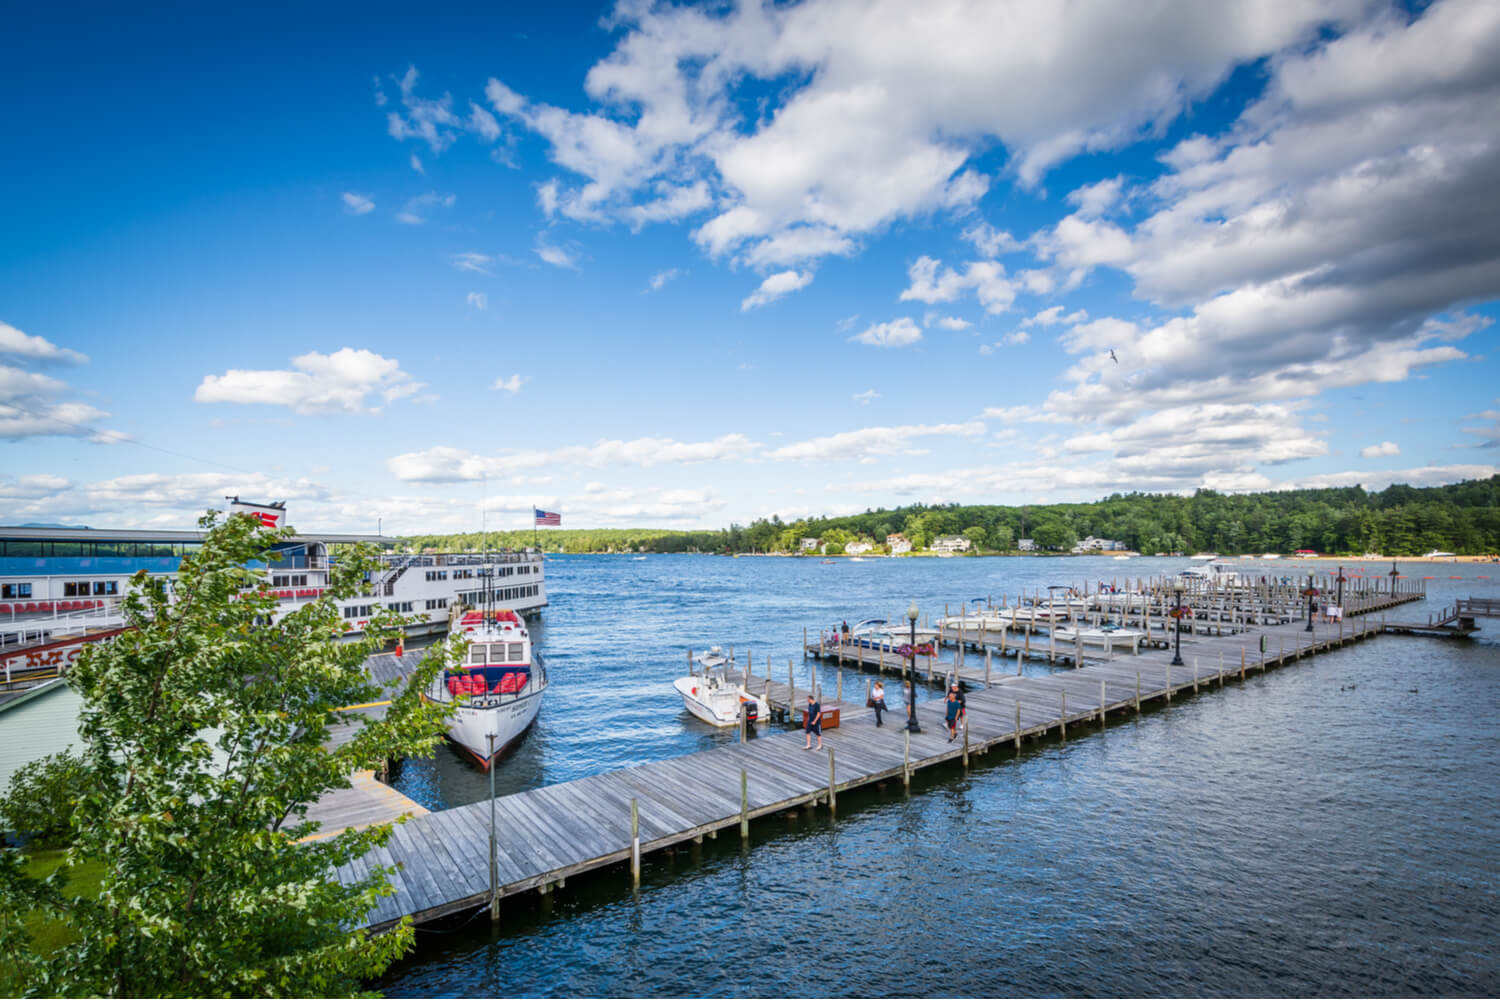 A full marina is one of the many staples of a New Hampshire summer in Laconia.